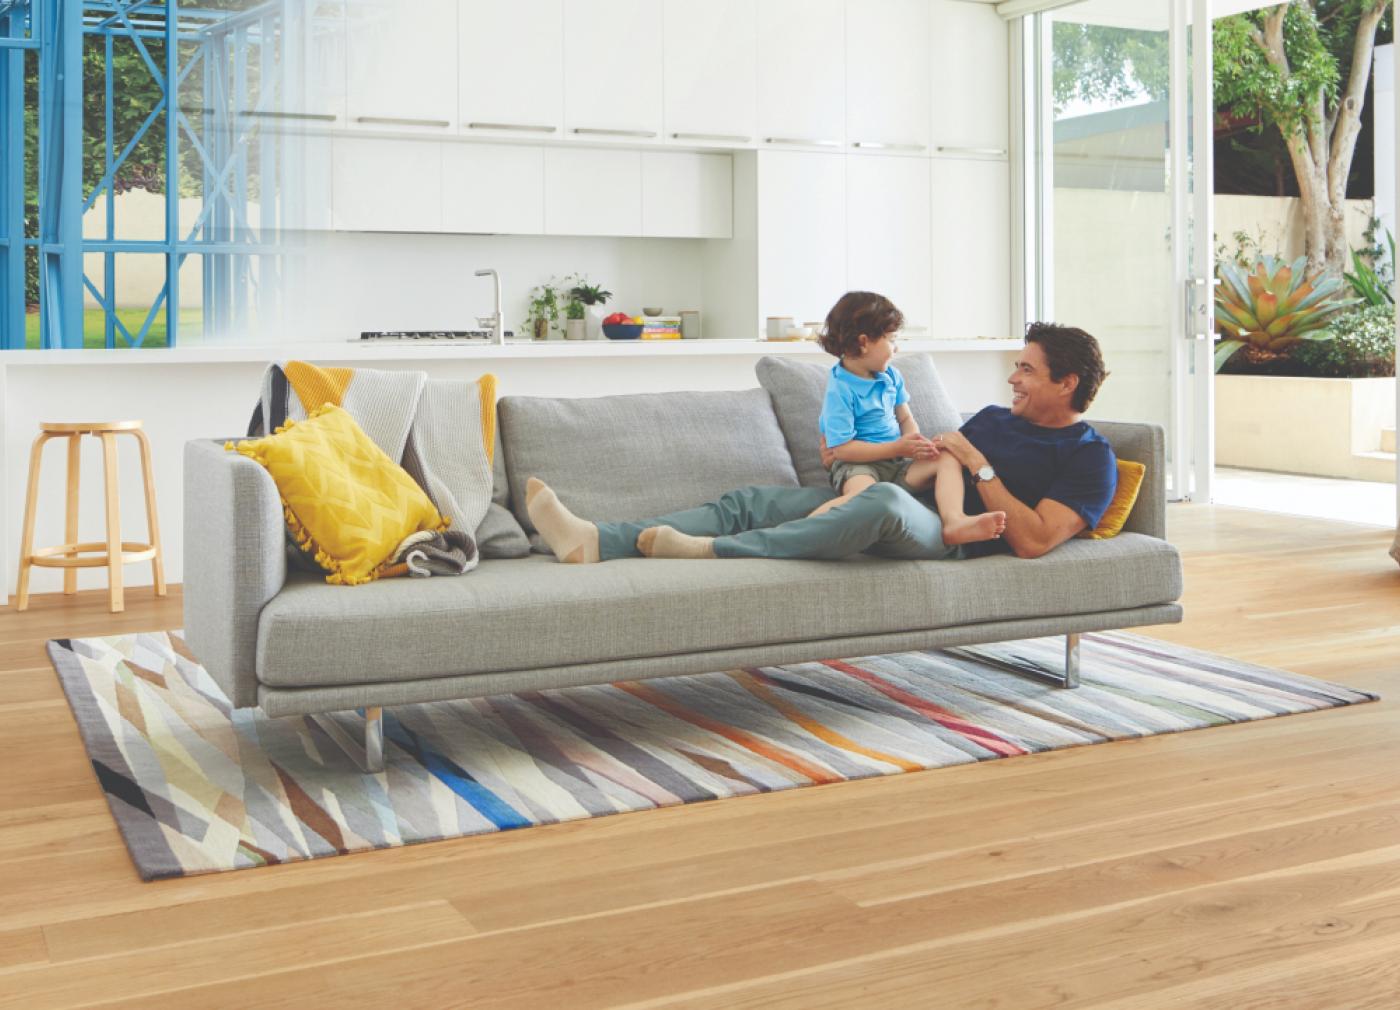 TRUECORE steel QLDbuilder promo_father and son on a grey lounge in a house made from blue steel frames